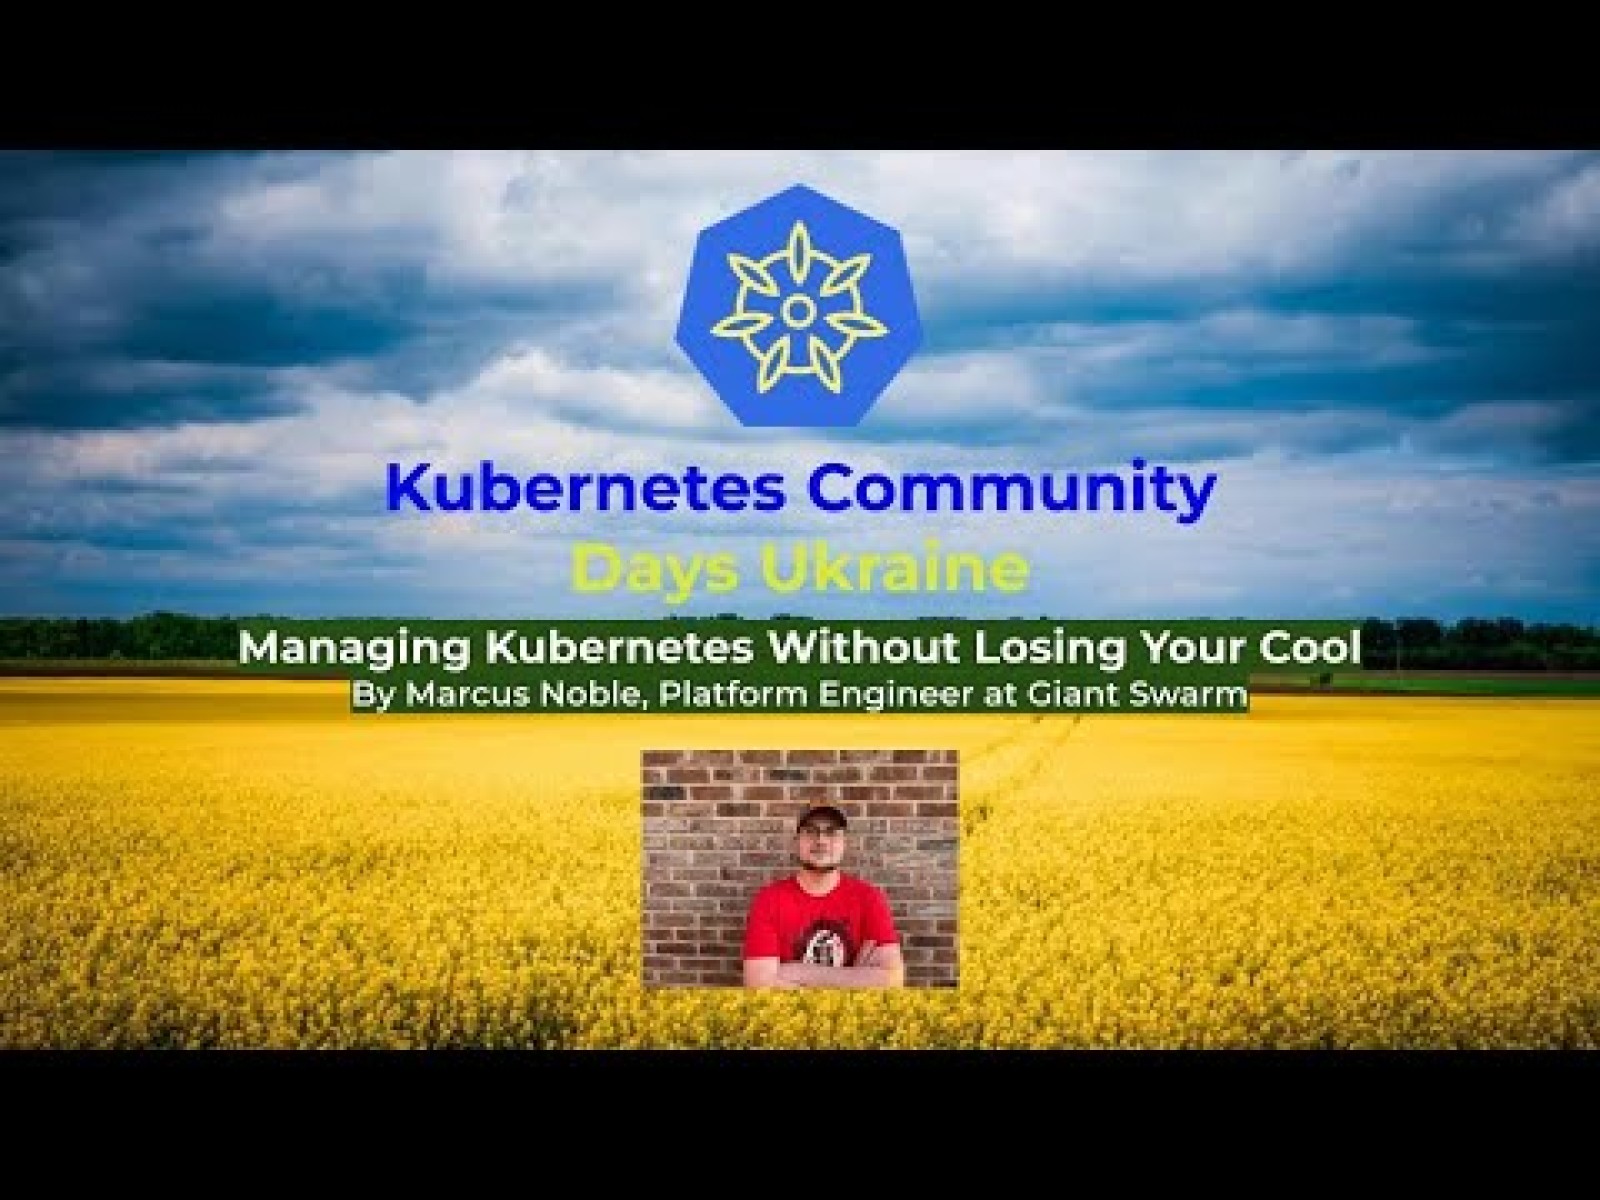 Managing Kubernetes without losing your cool